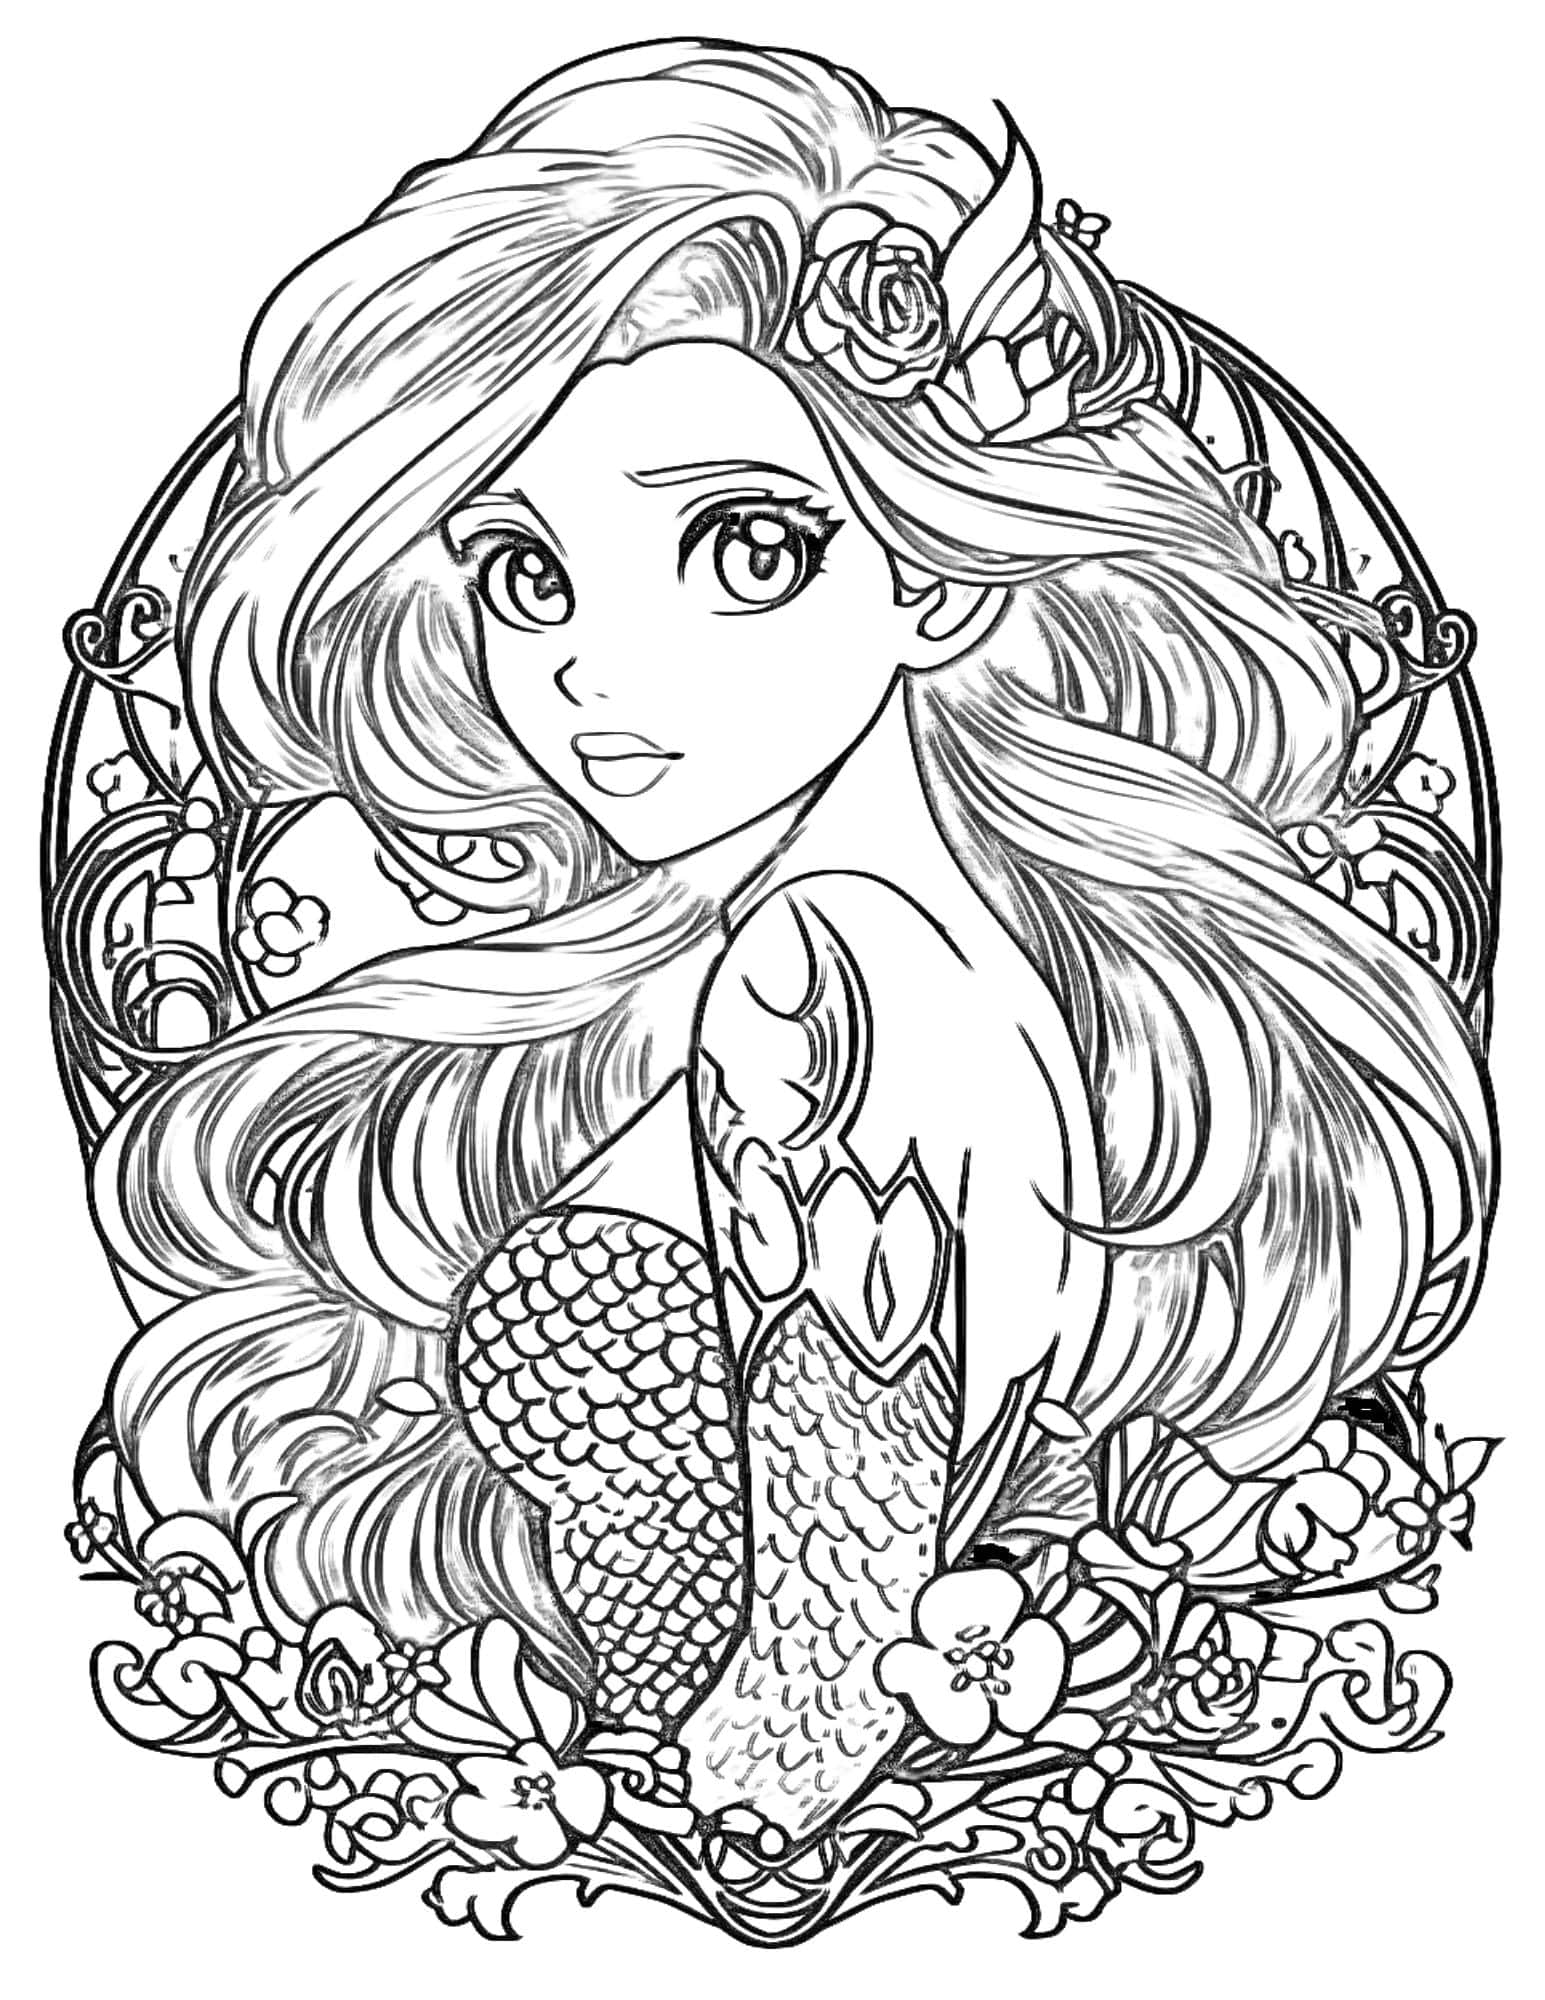 Get Creative with Siren Head Coloring Pages - Printable and Free